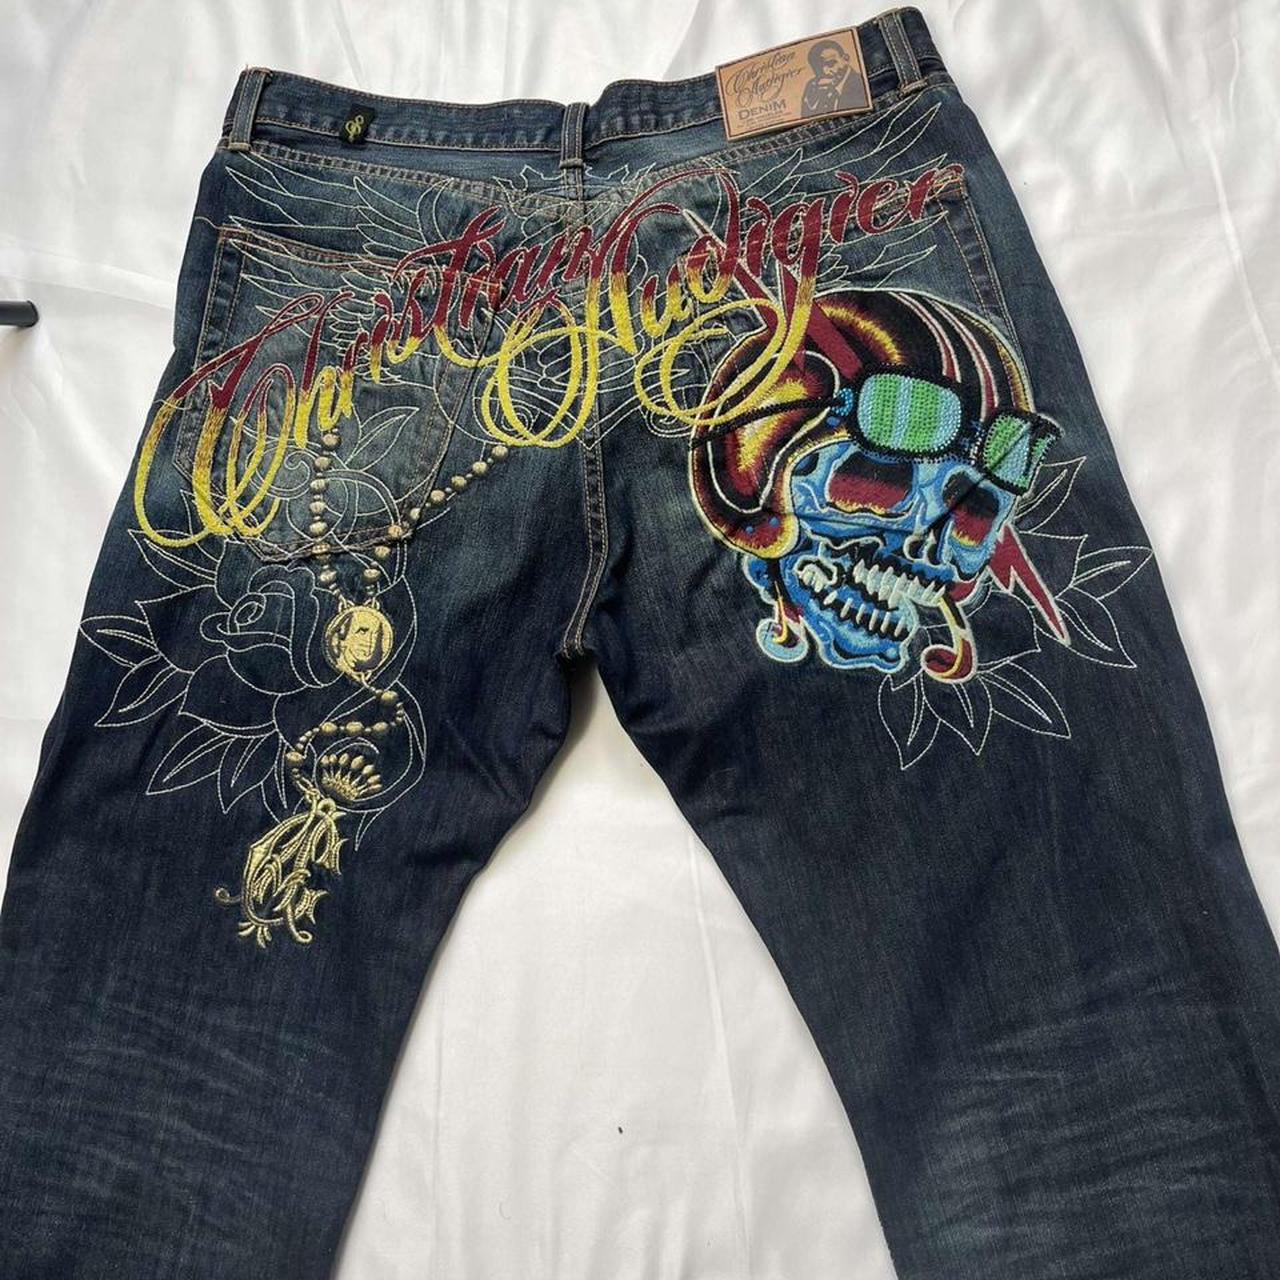 Authentic Christian Audigier Ed Hardy embroidered... - Depop